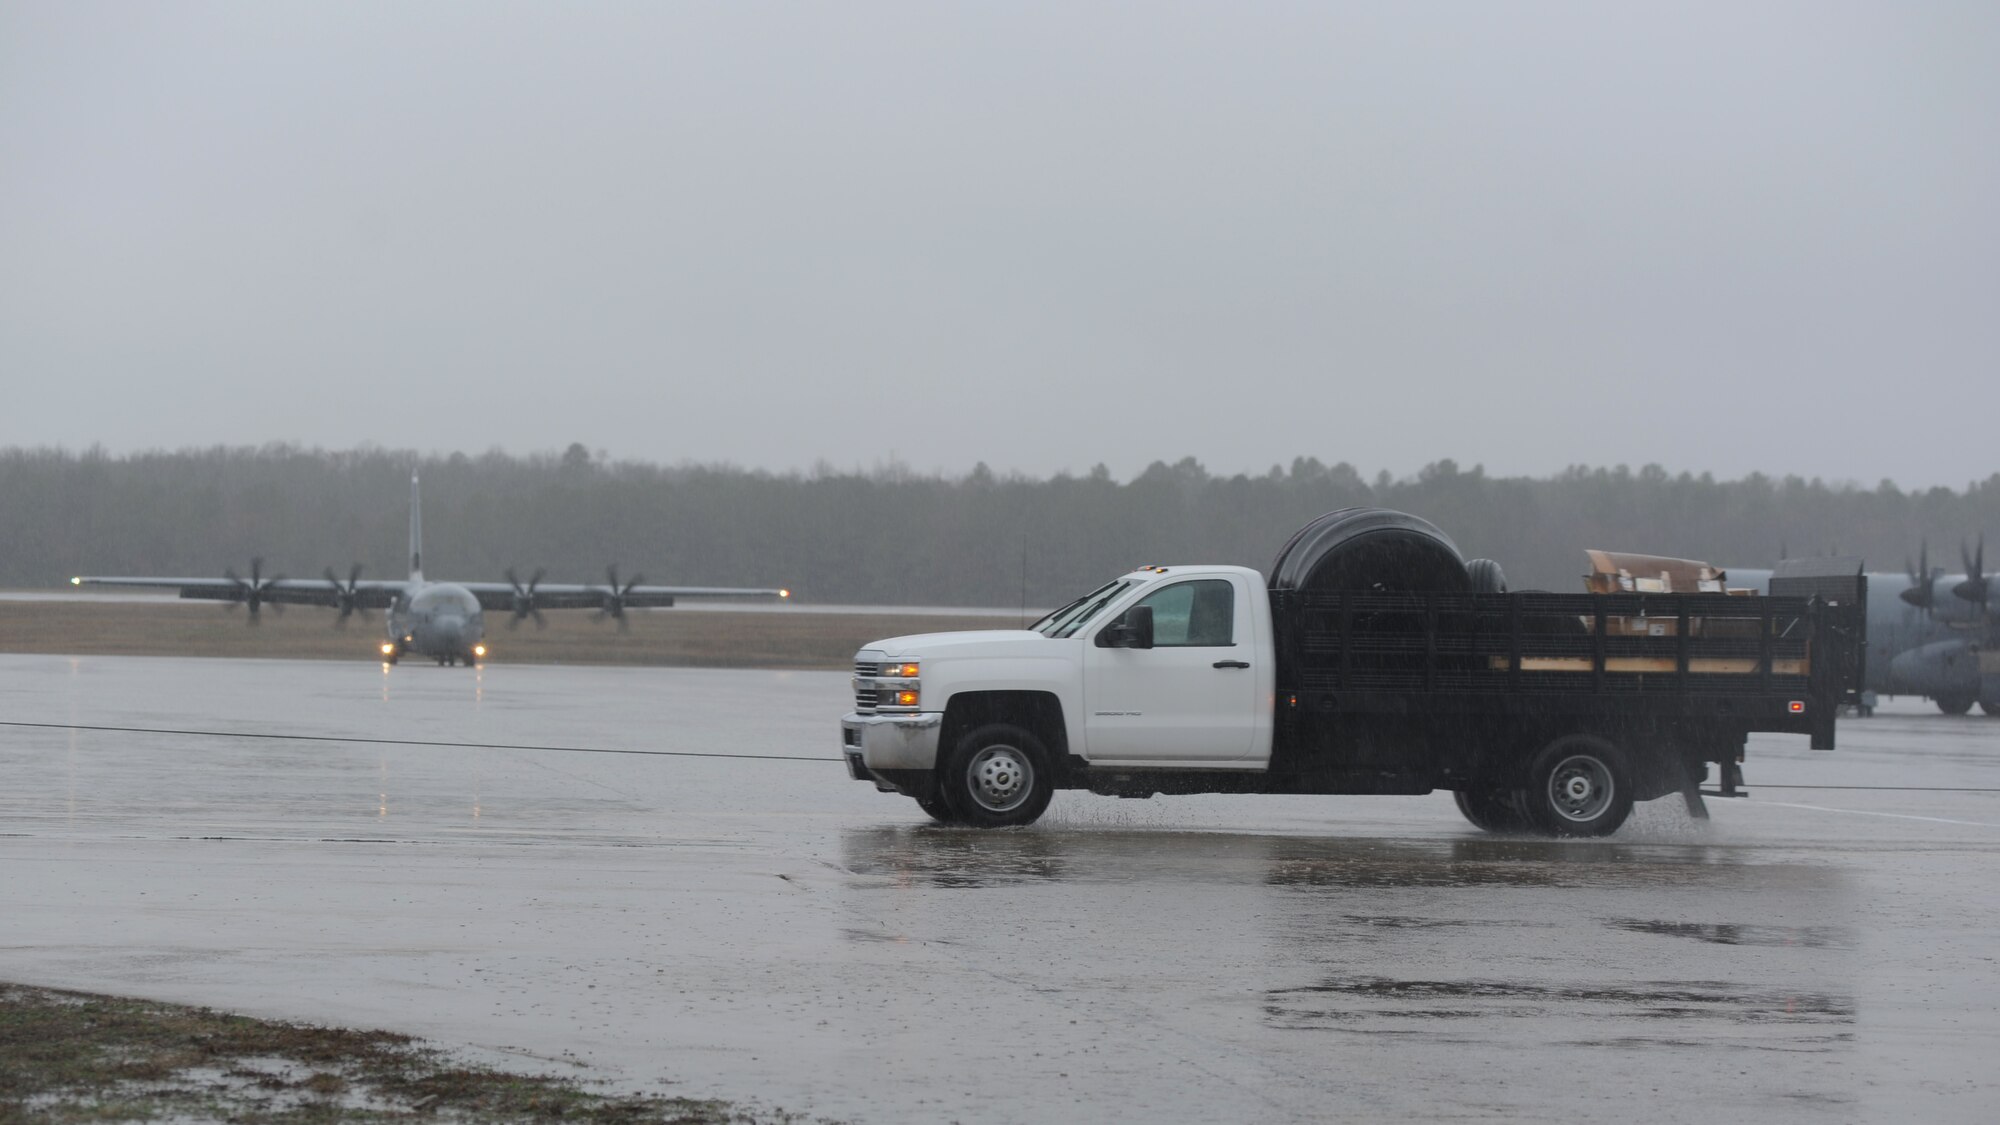 A rectangle photo with a truck on a flightline with an aircraft.